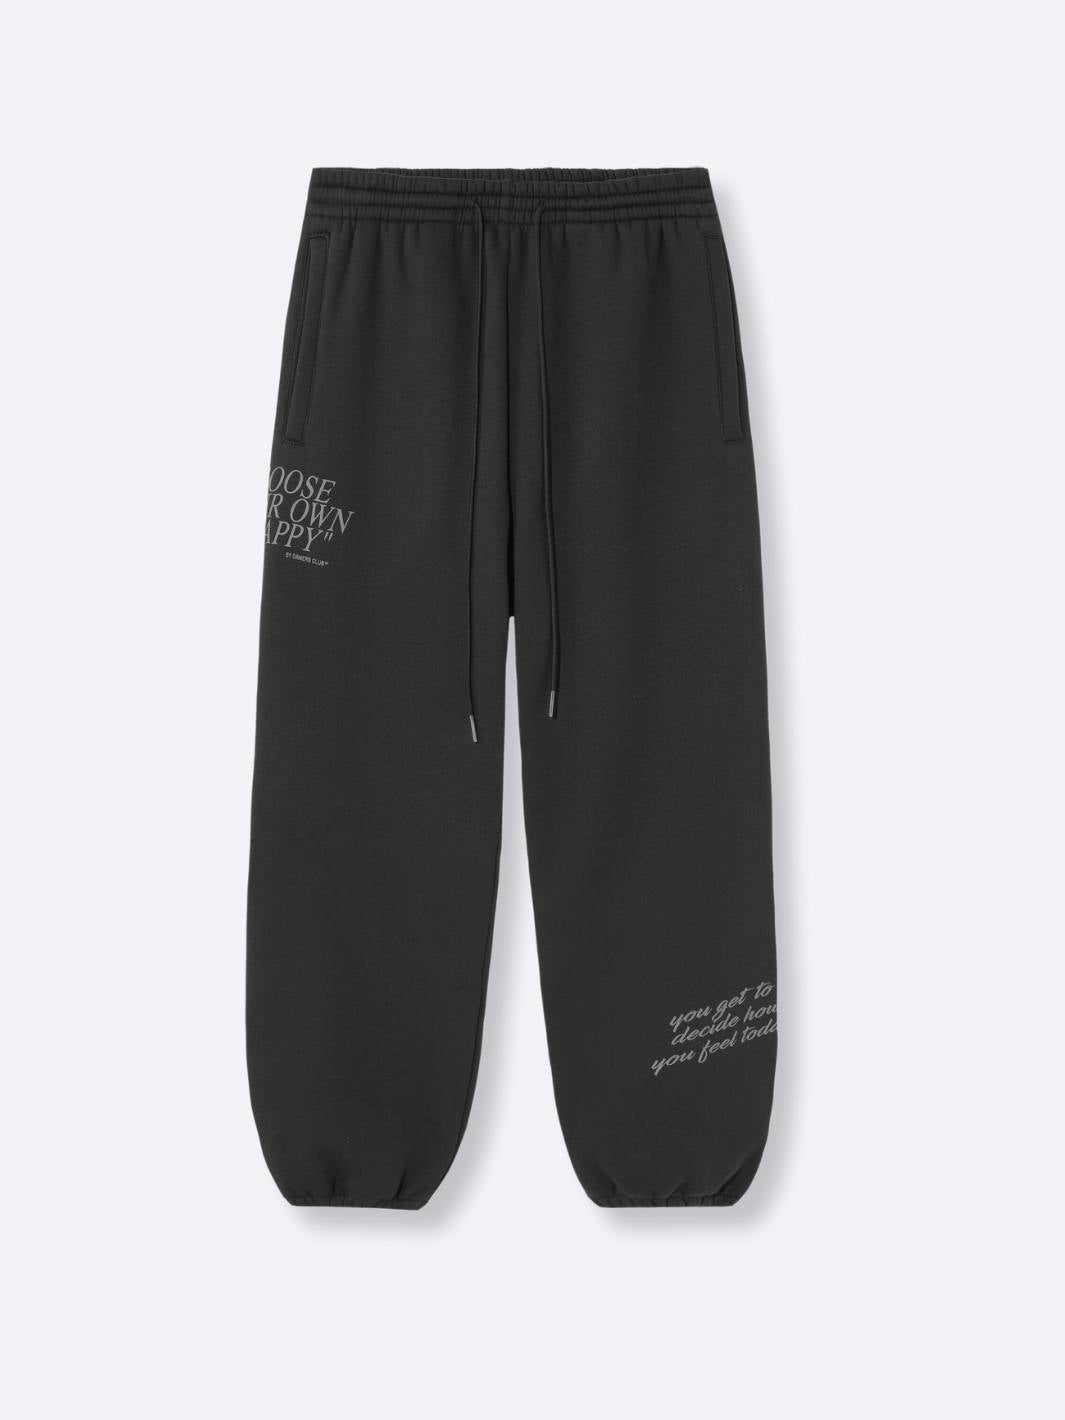 perspective sweatpants - faded black